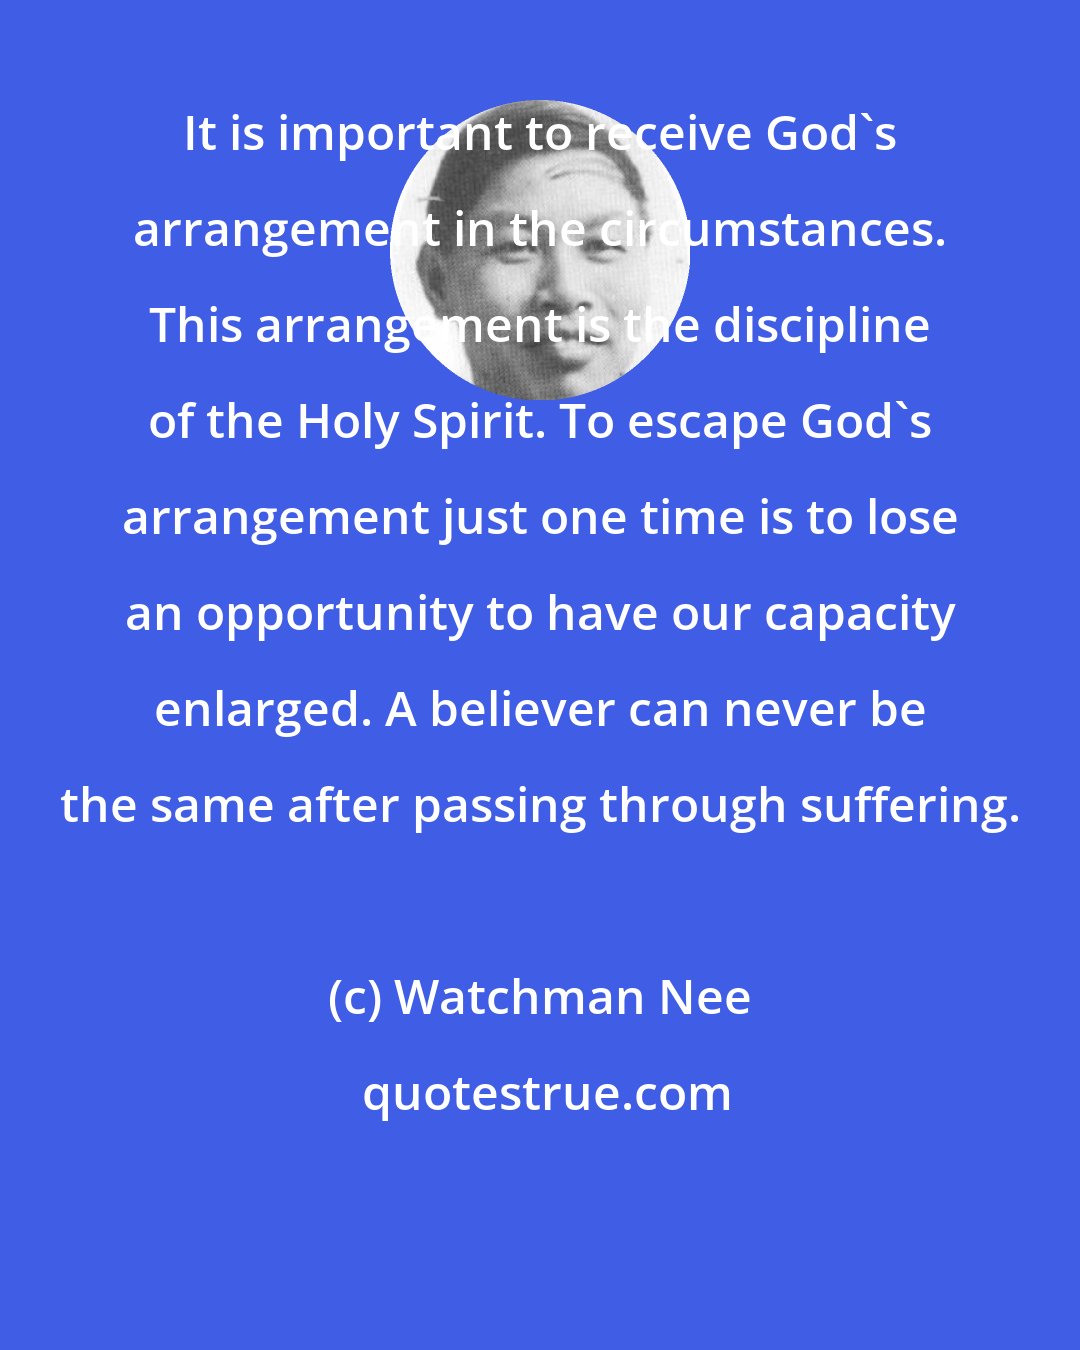 Watchman Nee: It is important to receive God's arrangement in the circumstances. This arrangement is the discipline of the Holy Spirit. To escape God's arrangement just one time is to lose an opportunity to have our capacity enlarged. A believer can never be the same after passing through suffering.